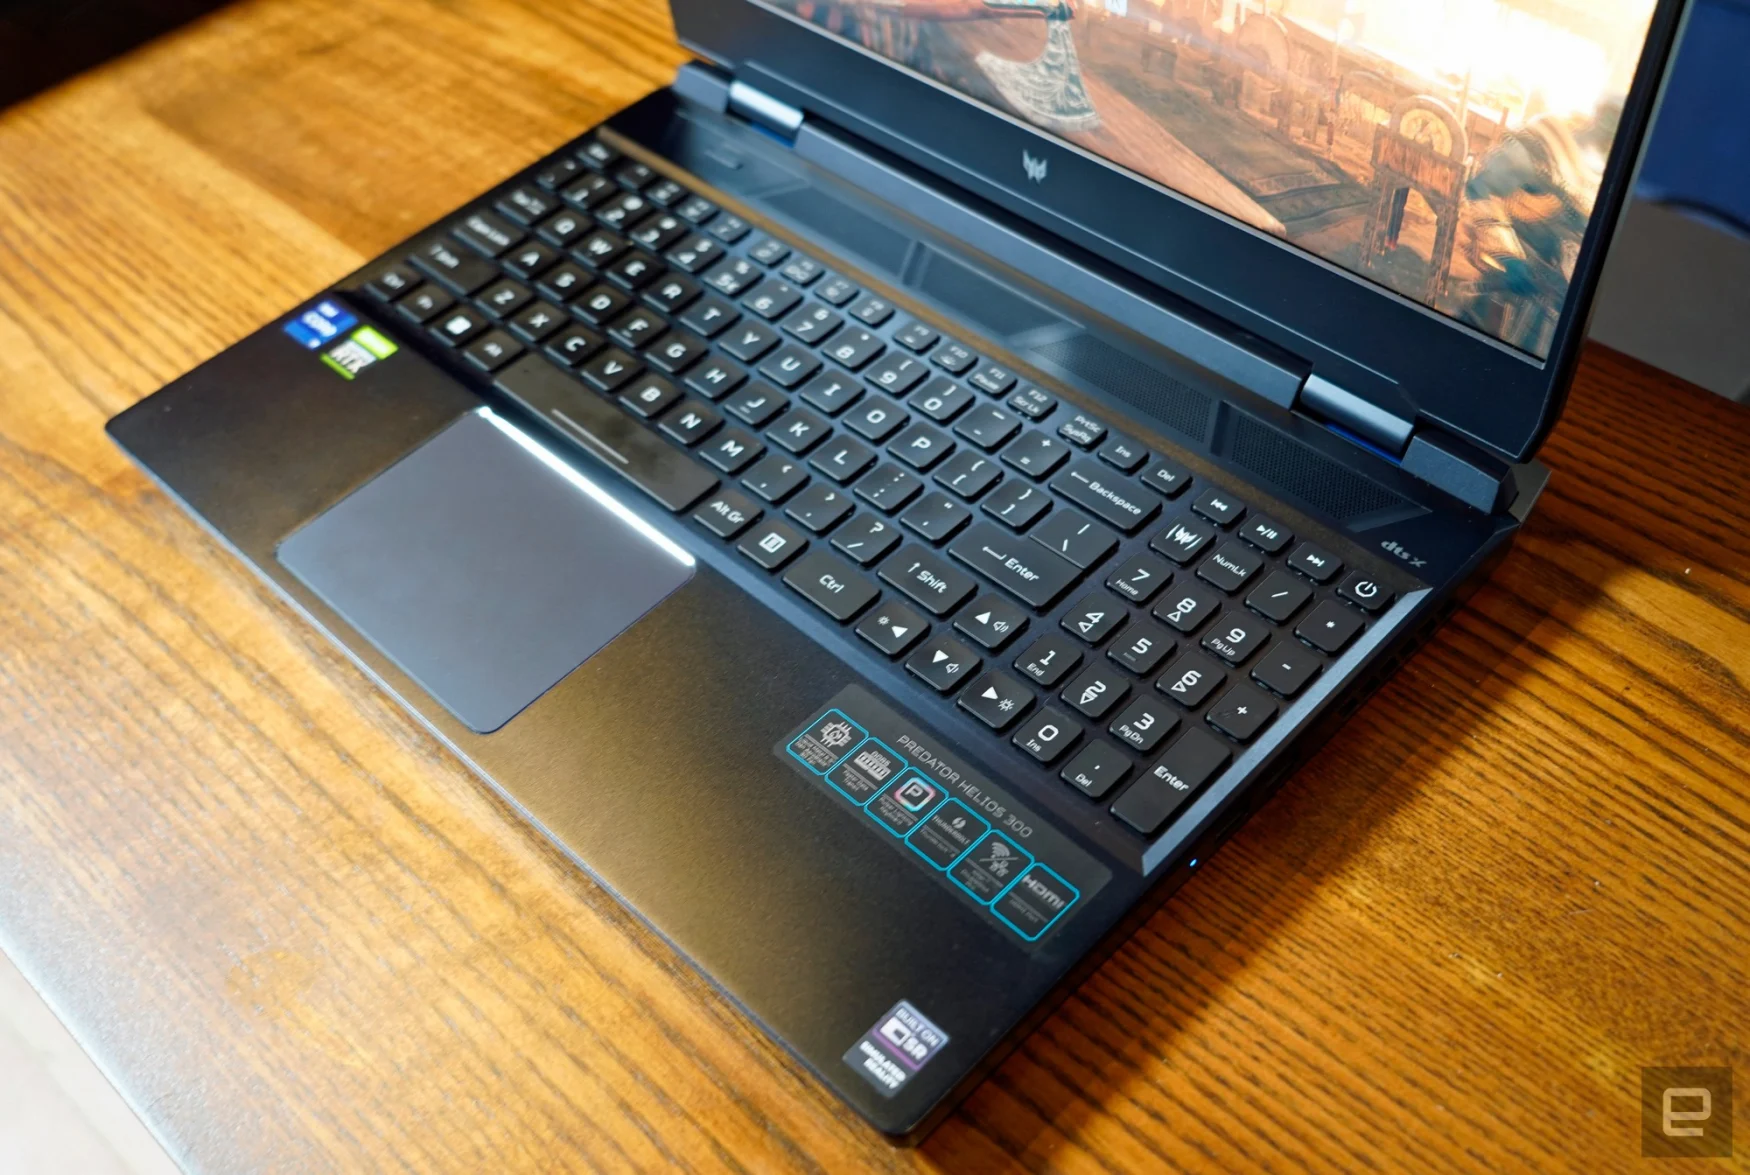 Acer Predator Helios 300 SpatialLabs Edition keyboard and trackpad